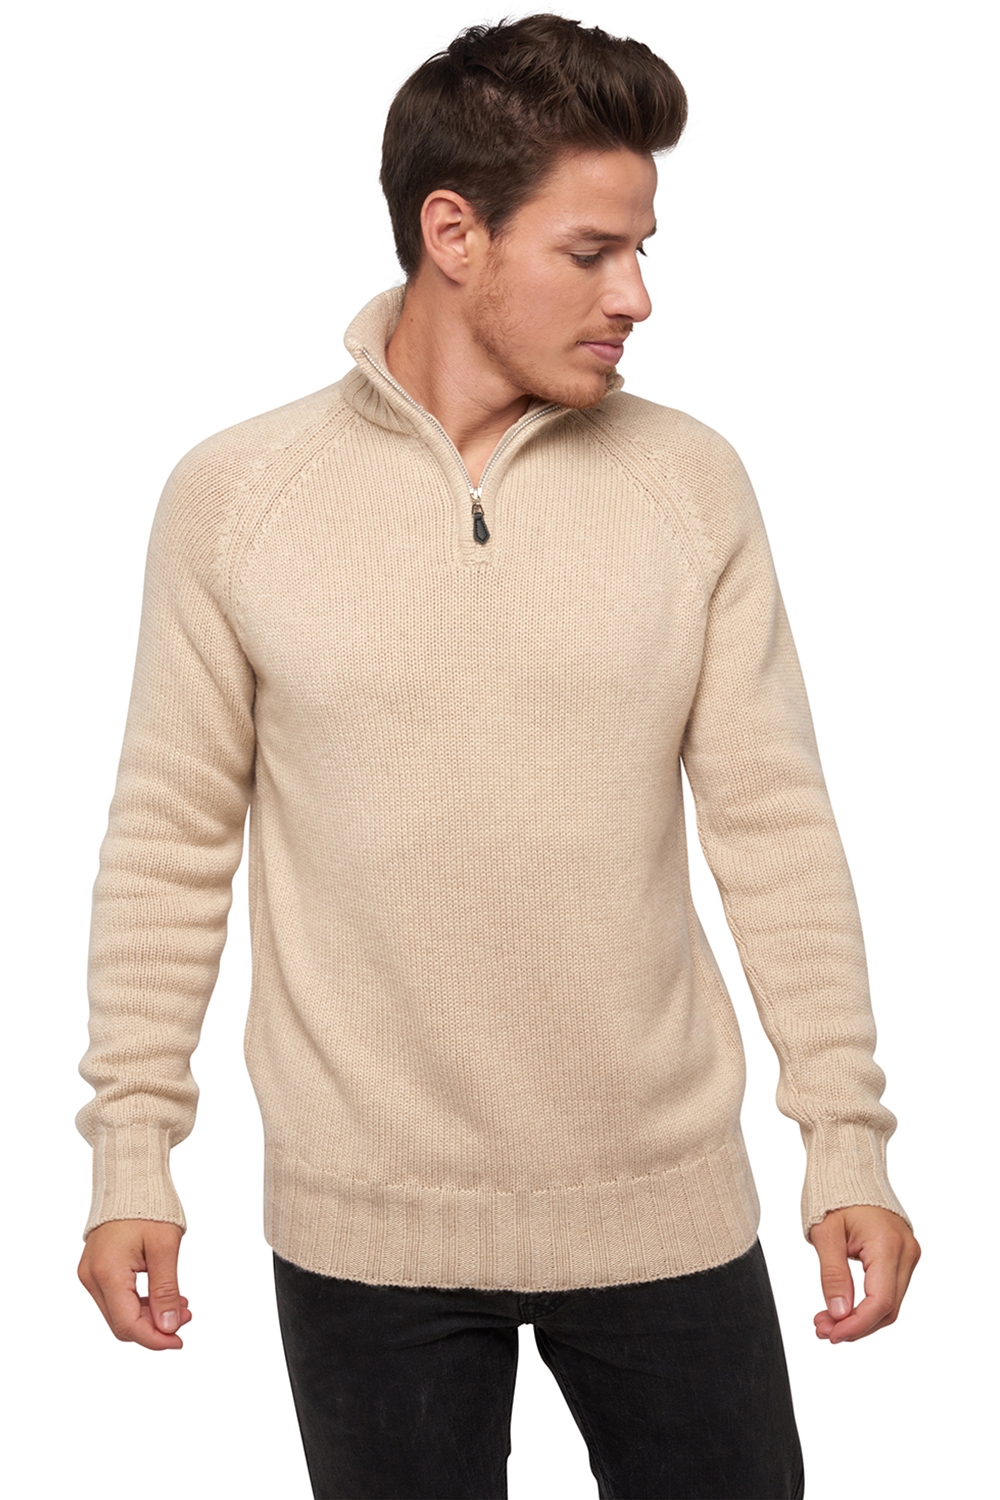  men polo style sweaters natural viero natural beige 2xl